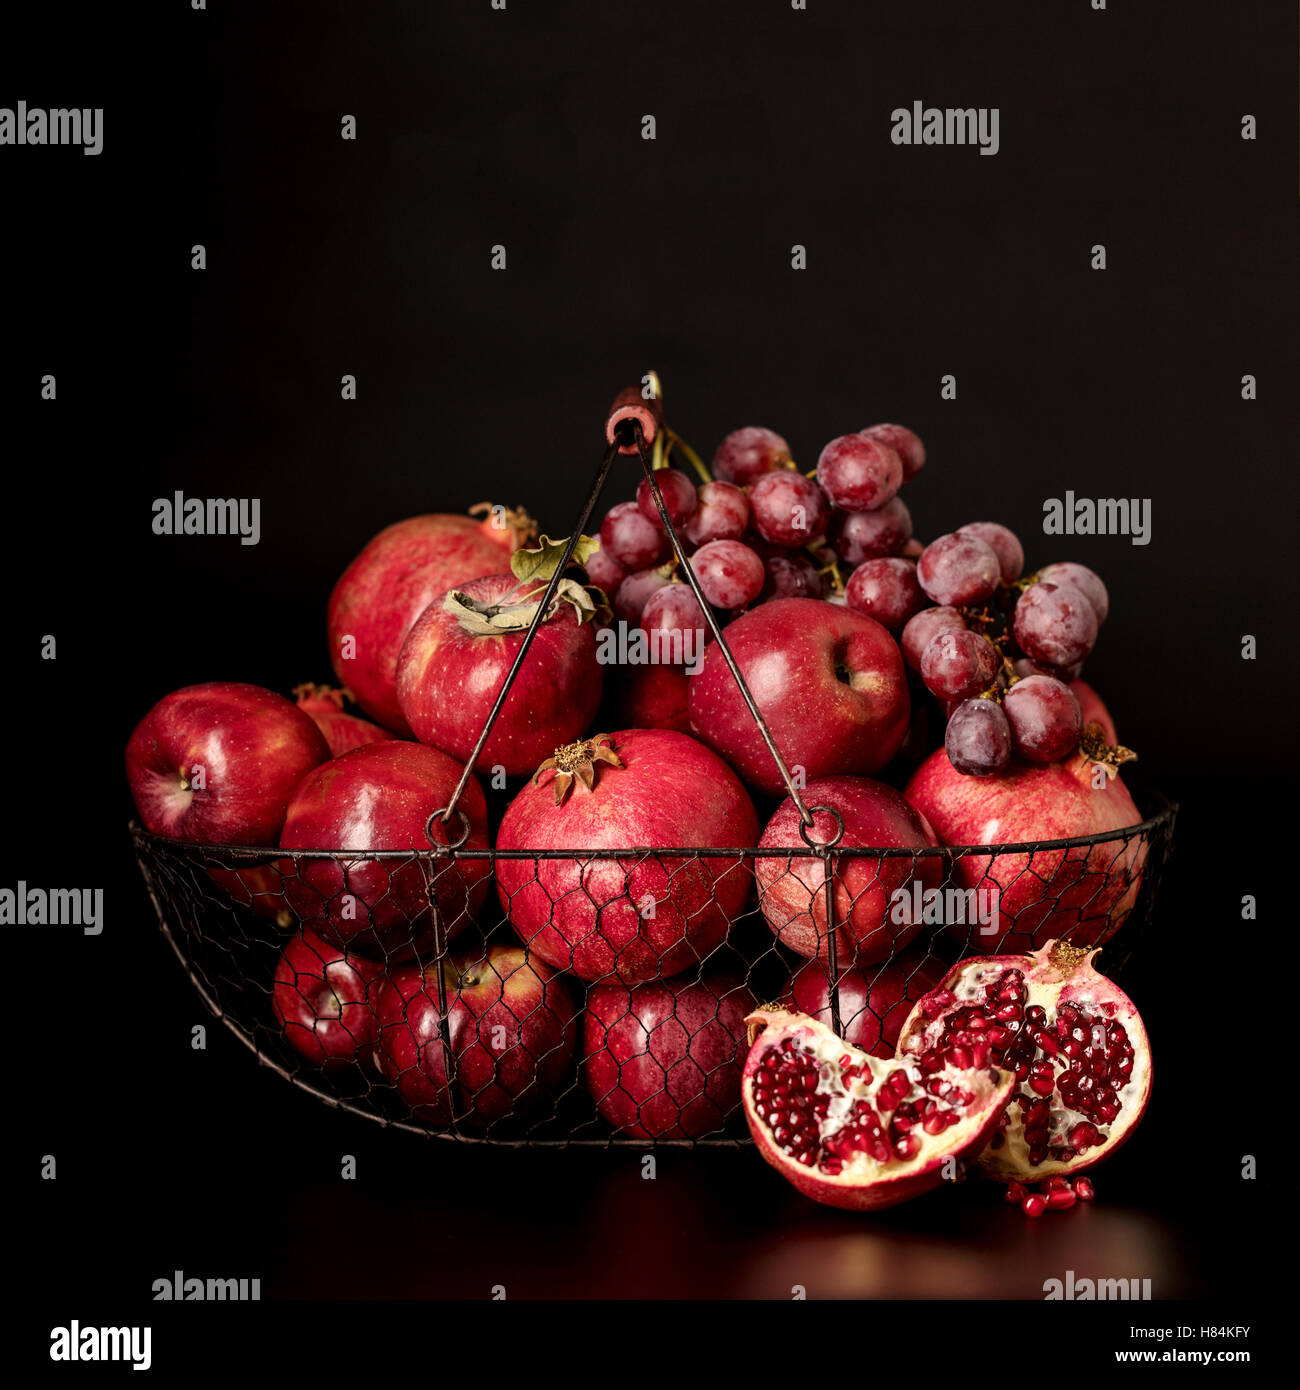 Still life on a dark background. Fruits and berries (apples, pomegranates and grapes) in the basket. Stock Photo